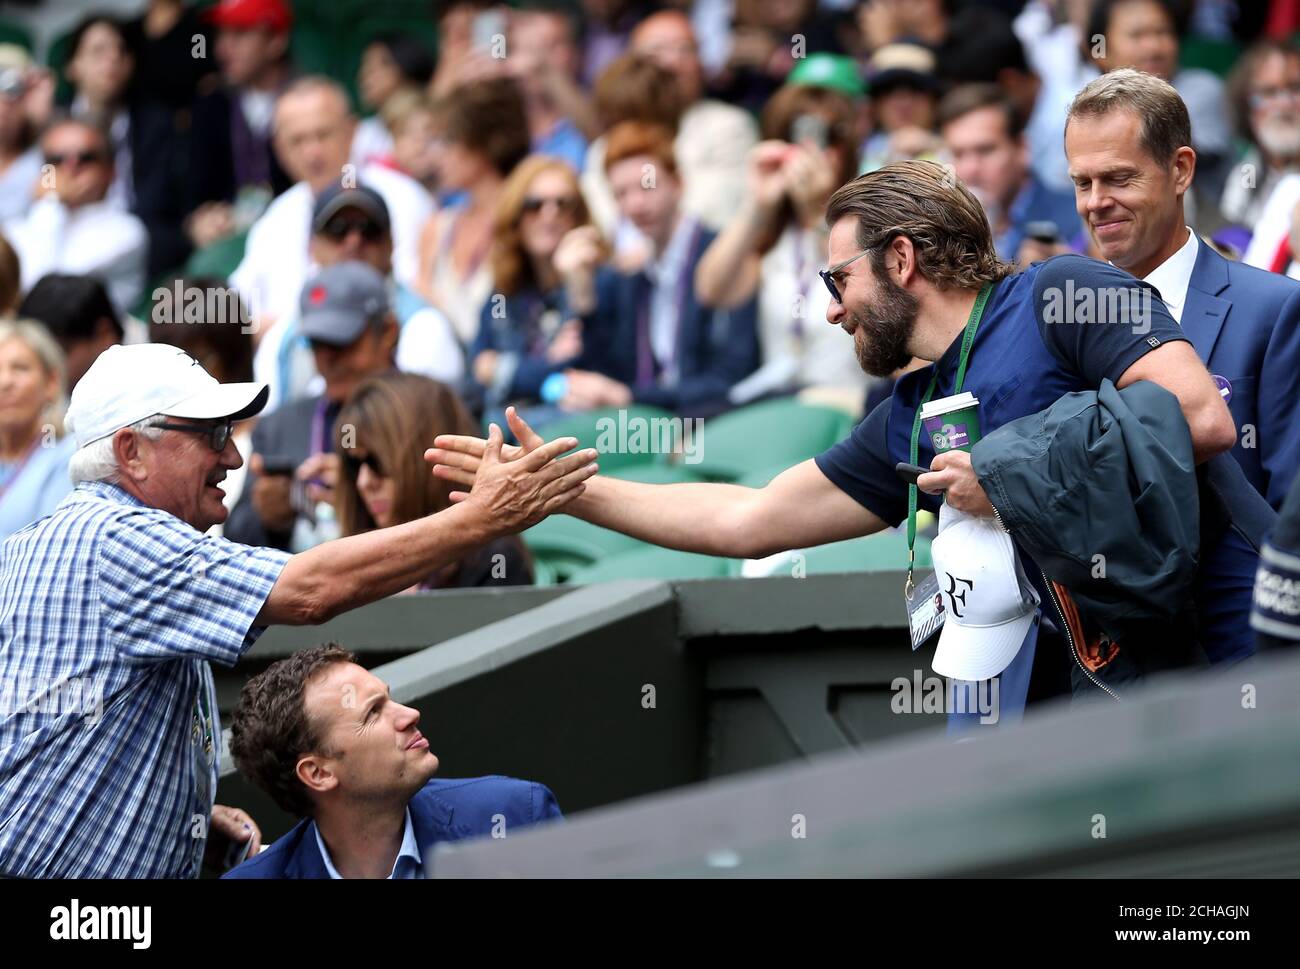 Robert Federer (left) greets Bradley Cooper in Roger Federer's players box on day eleven of the Wimbledon Championships at the All England Lawn Tennis and Croquet Club, Wimbledon. Stock Photo